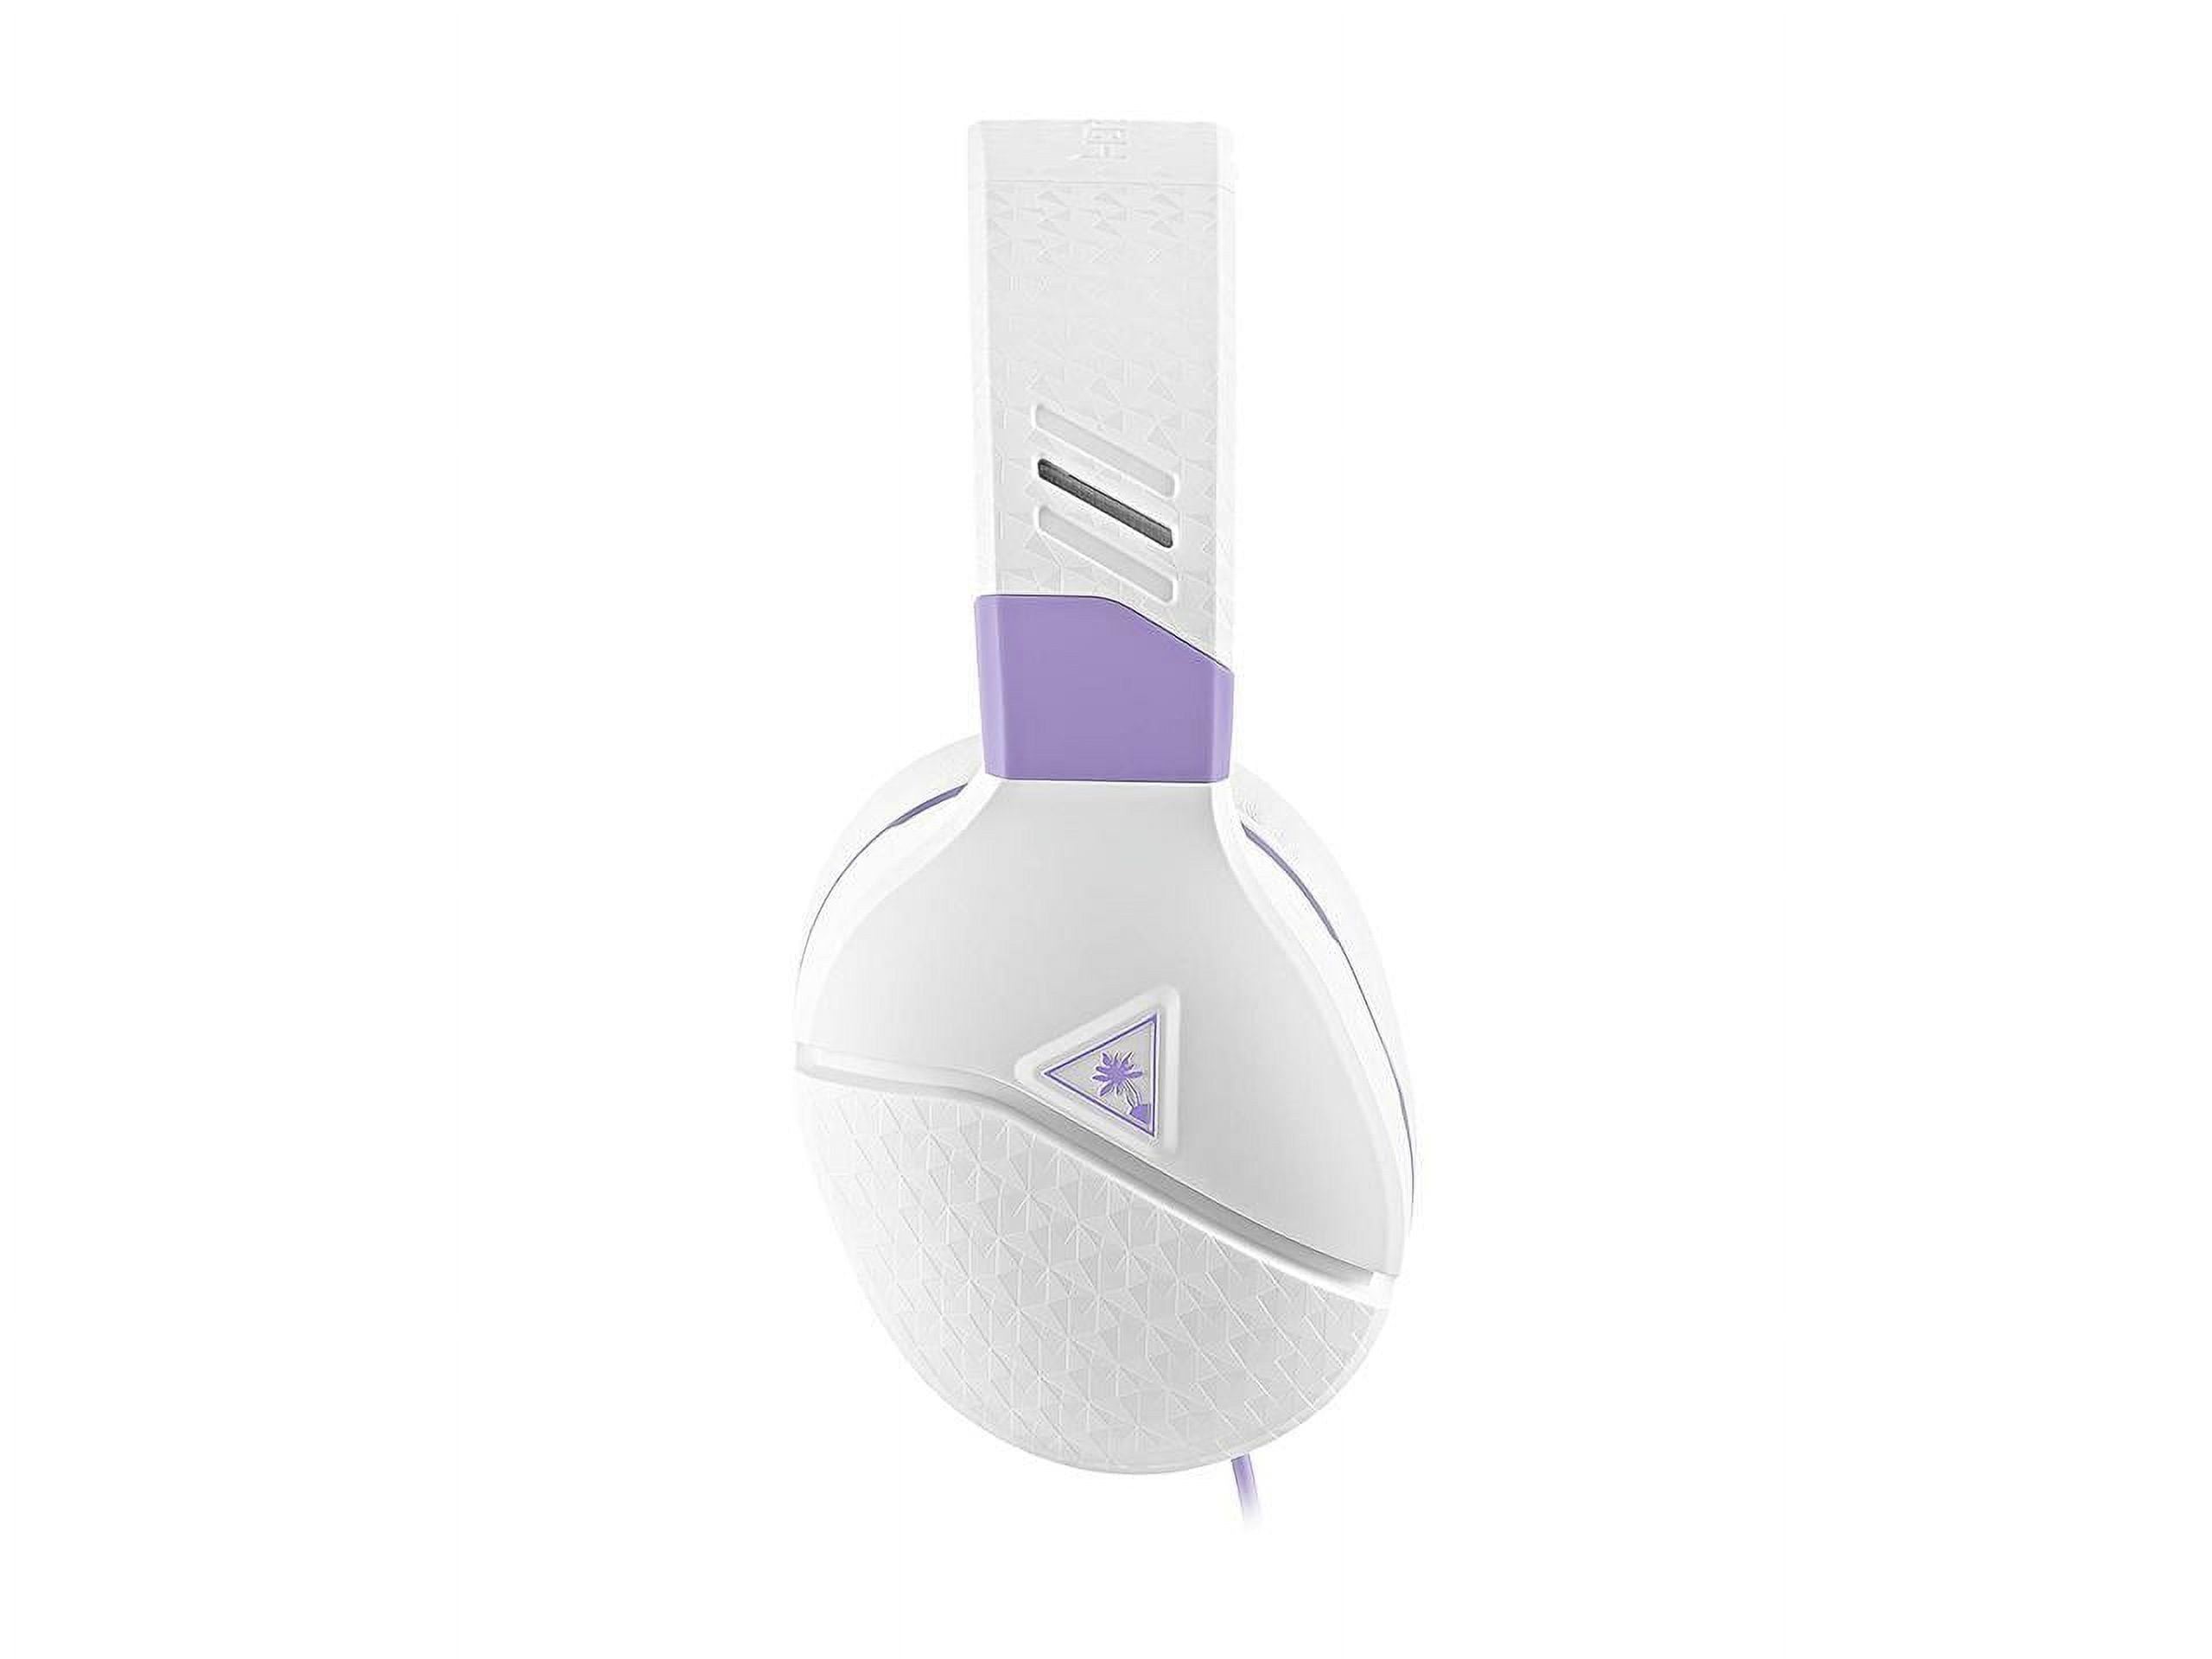 Turtle Beach Recon Spark Wired Gaming Headset for Nintendo Switch/Xbox  One/Series X|S/PlayStation 4/5 - White/Purple